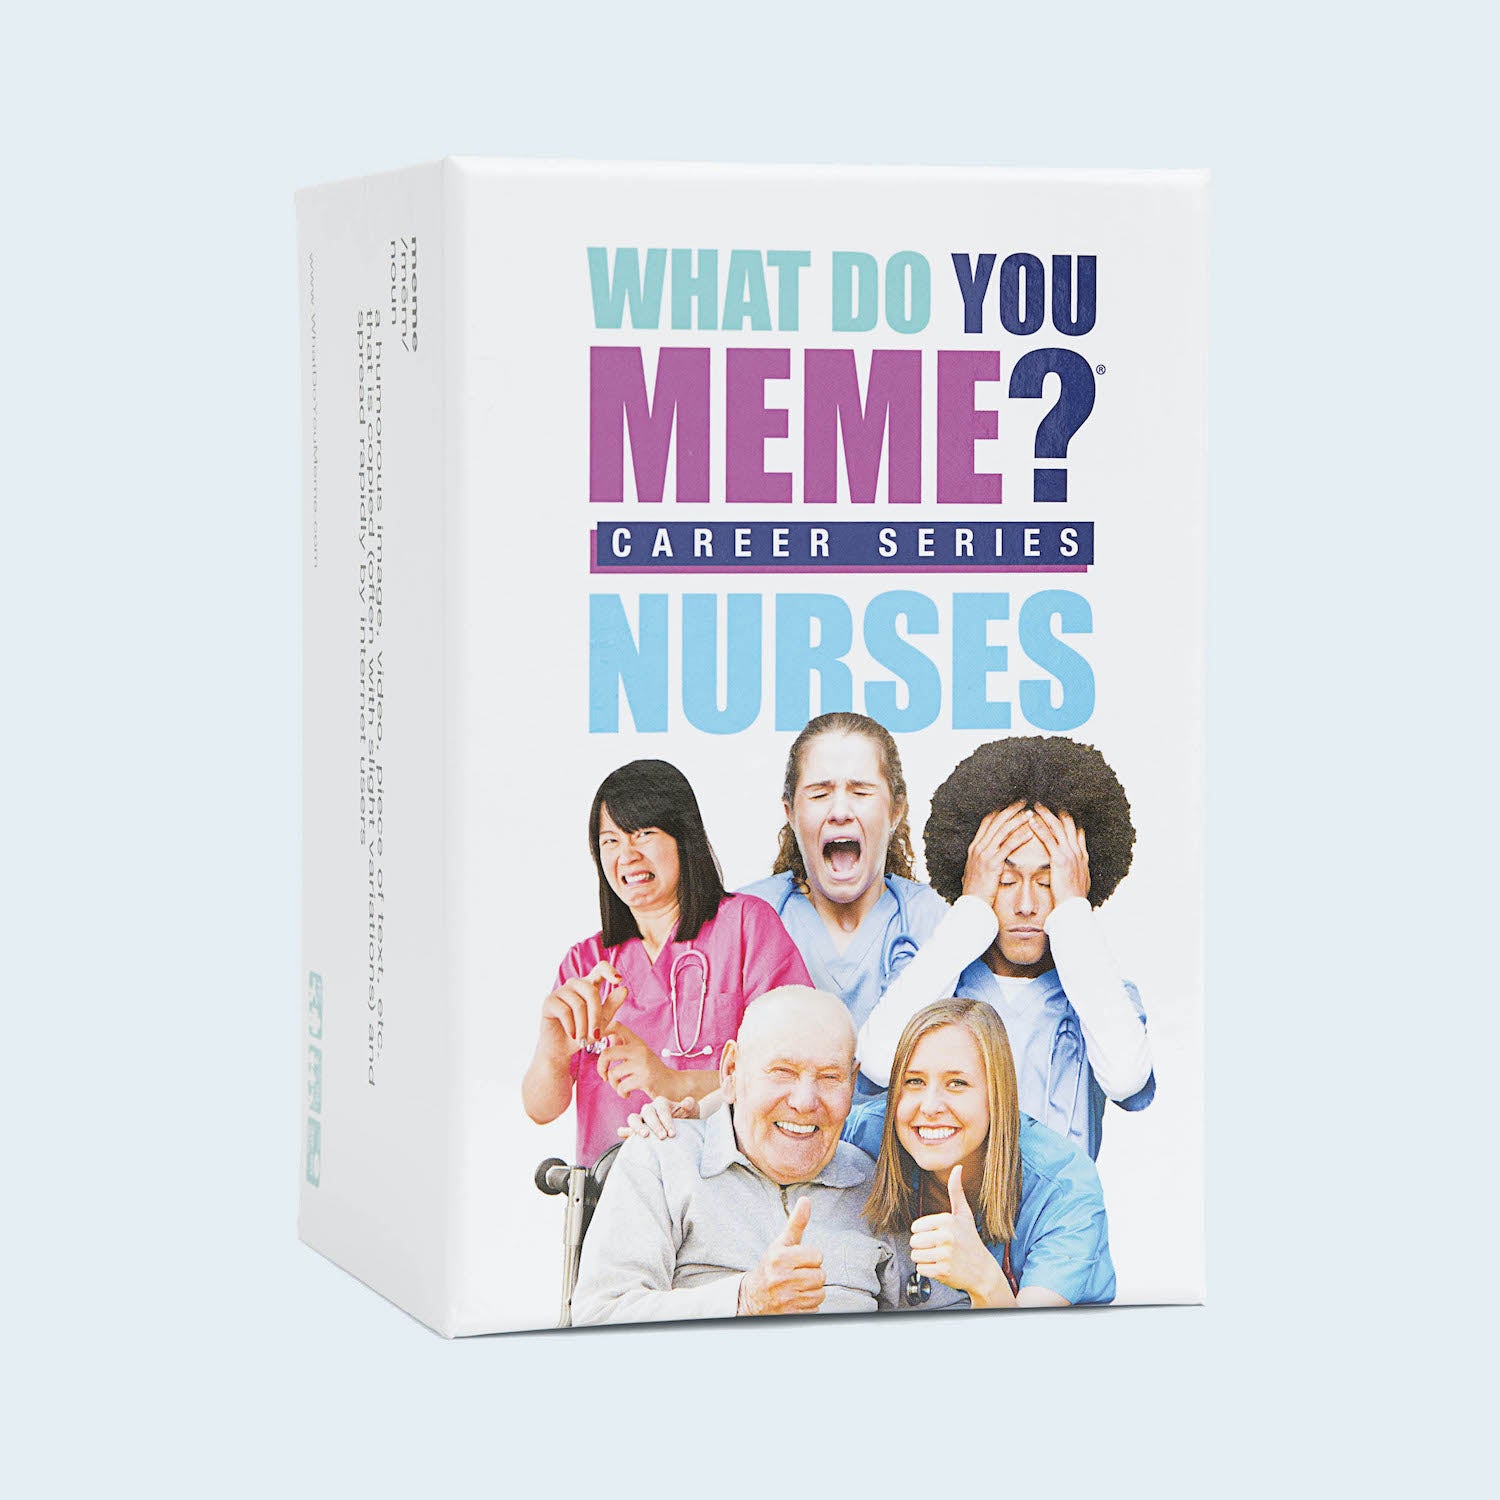 what-do-you-meme-career-series-nurses-game-box-and-game-play-02-what-do-you-meme-by-relatable